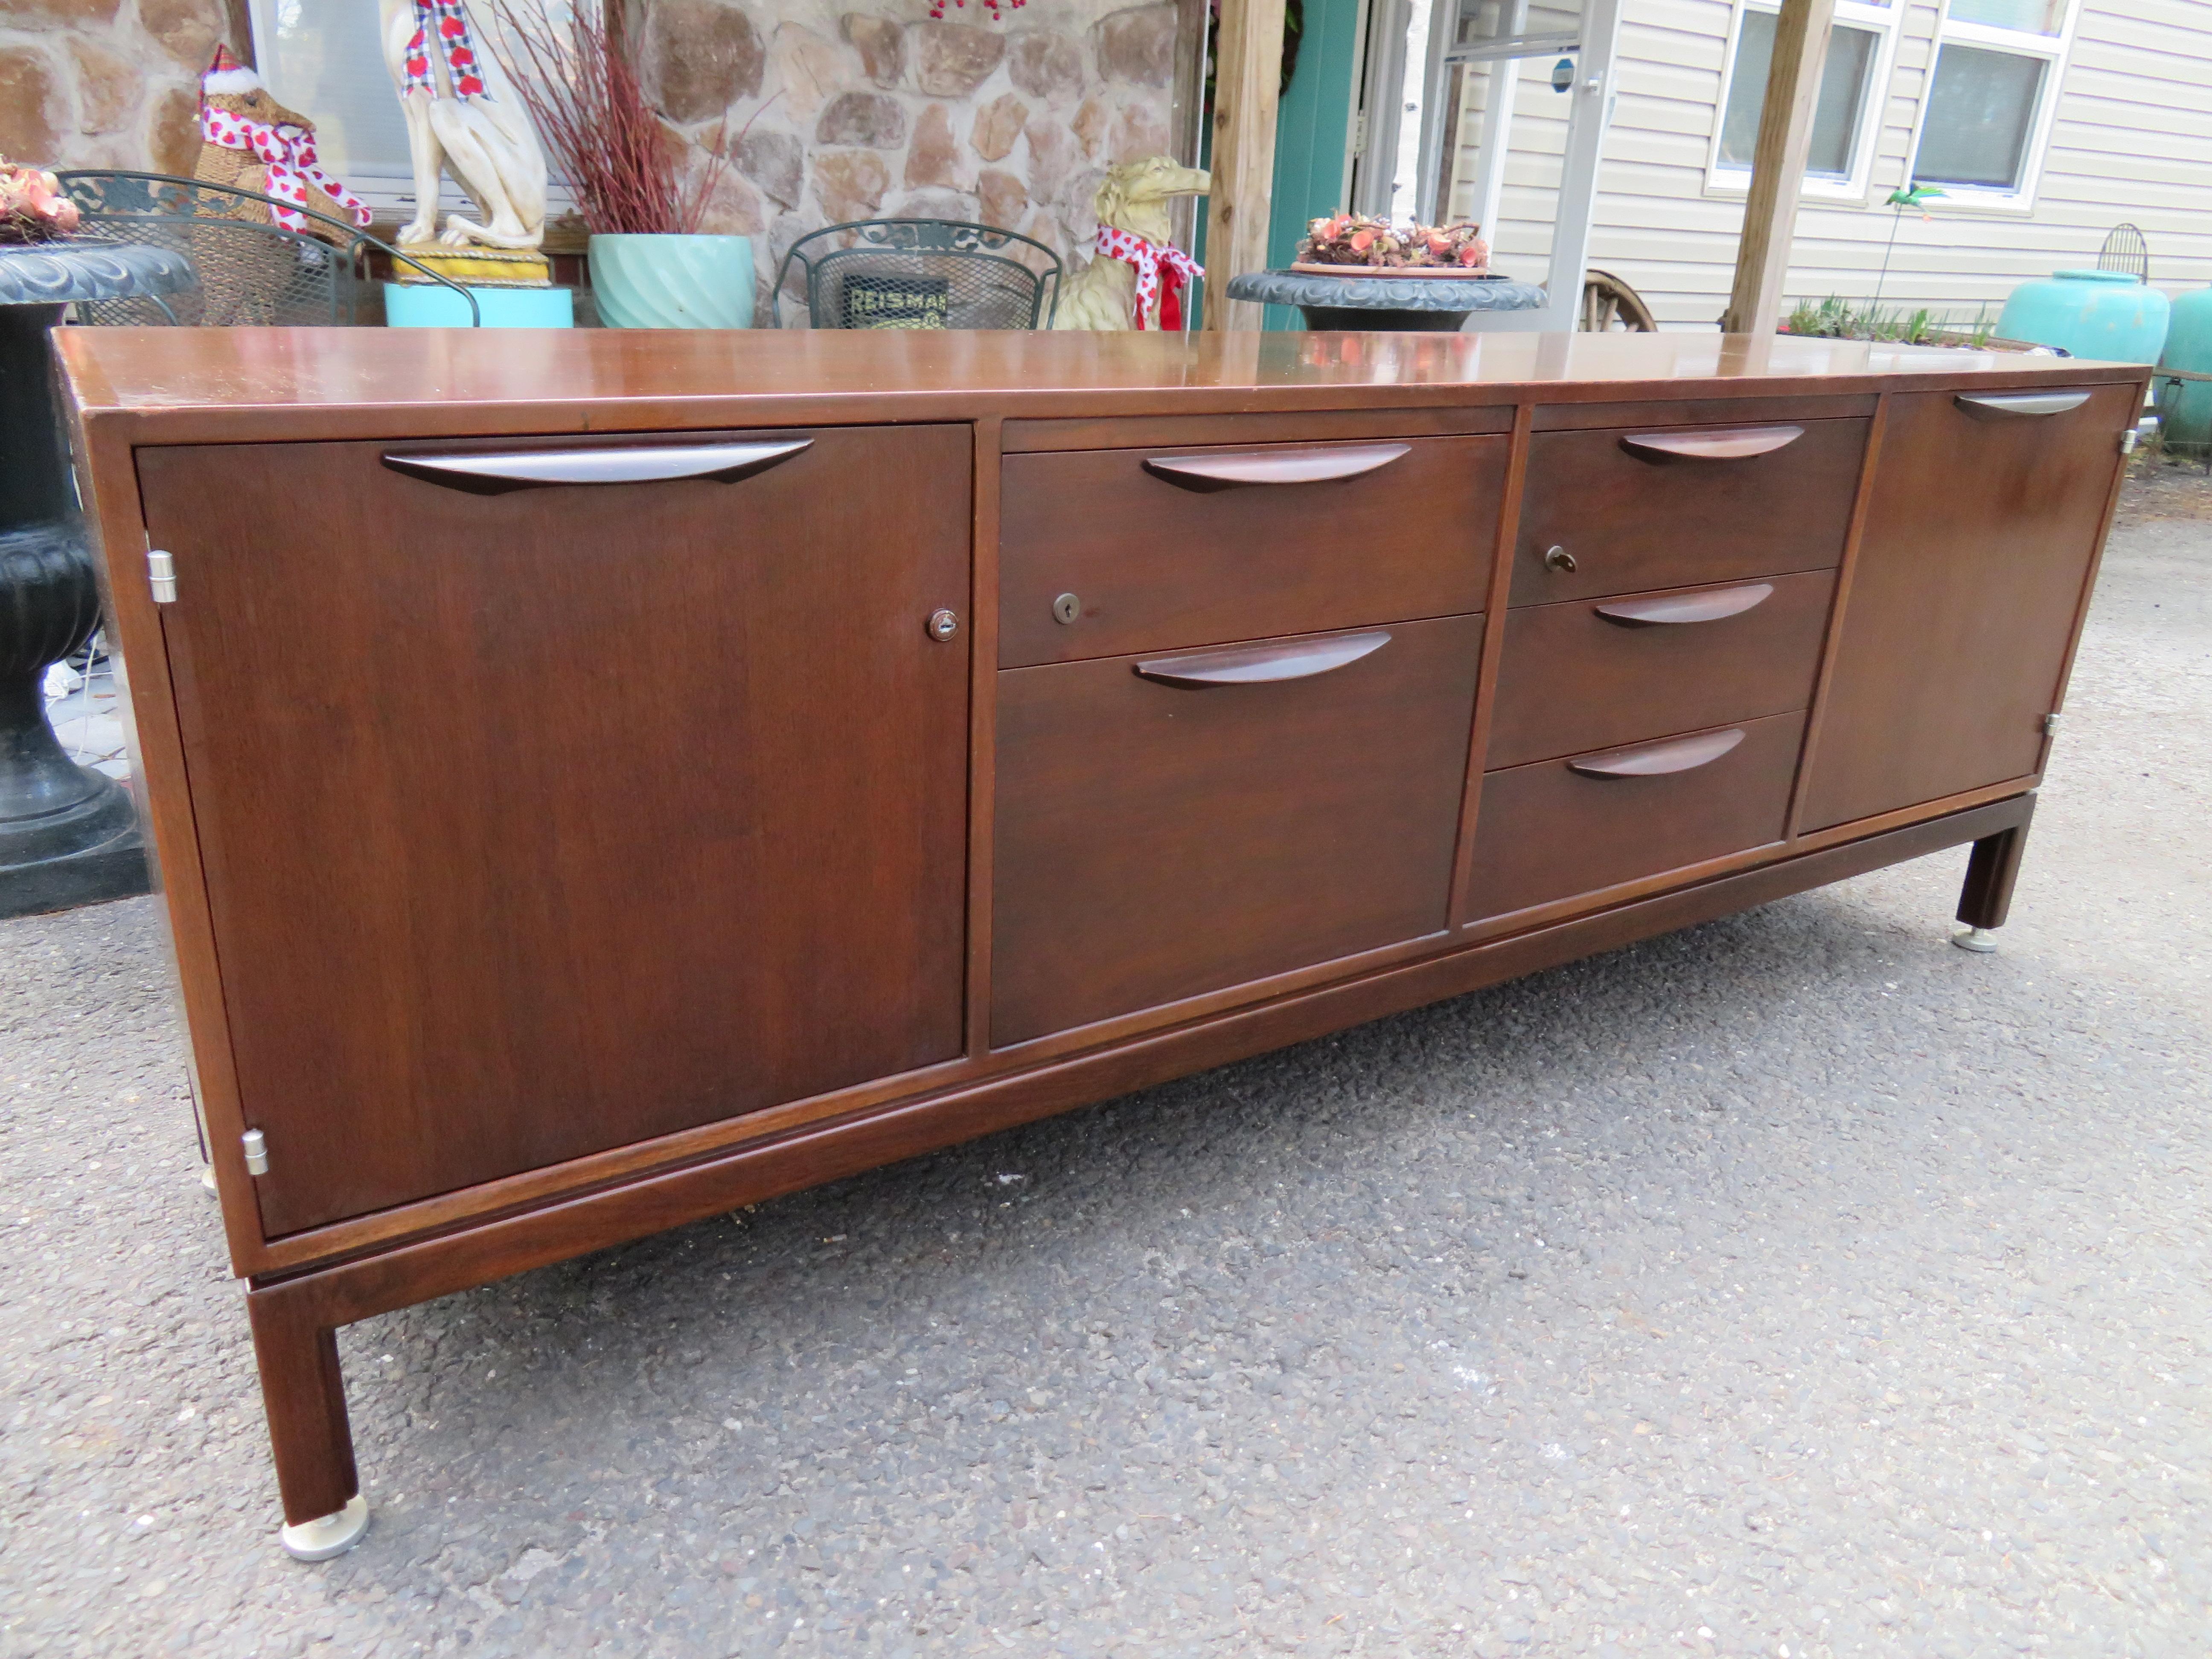 If you are looking for an icon of Mid-Century Modern – Scandinavian Modern design, look no further. And if you are wanting a beautiful and functional credenza for your home or office, look no further. This fabulous credenza was designed circa